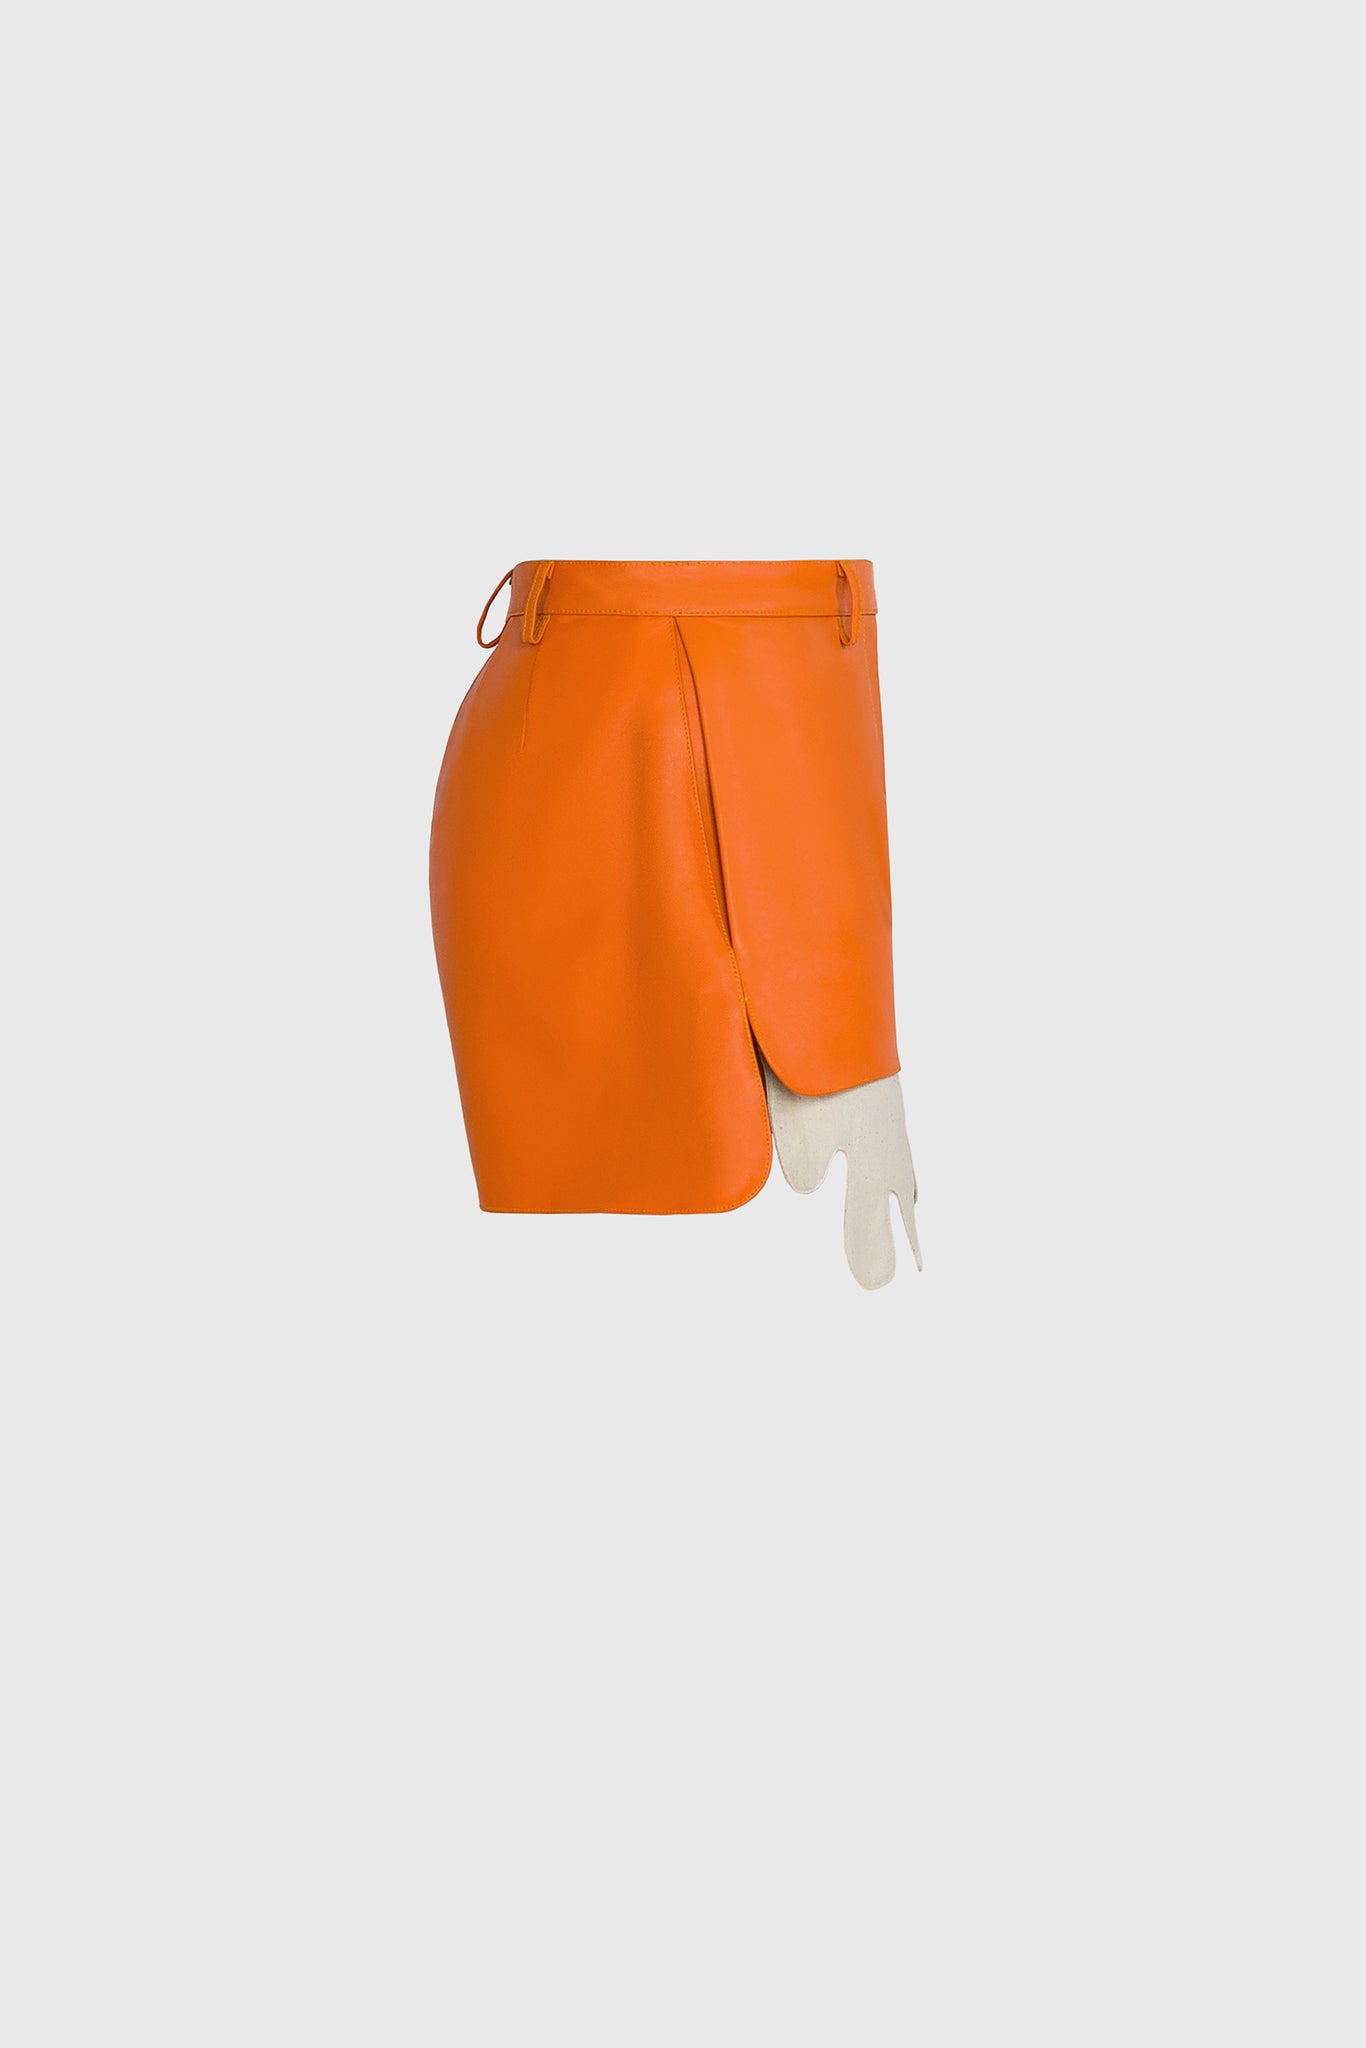 curvy shorts, with belt loops for belts or cords, easy to accessorize, outfit of the day, modern design, club shorts, Coachella music festival style, worn by Miley Cyrus 